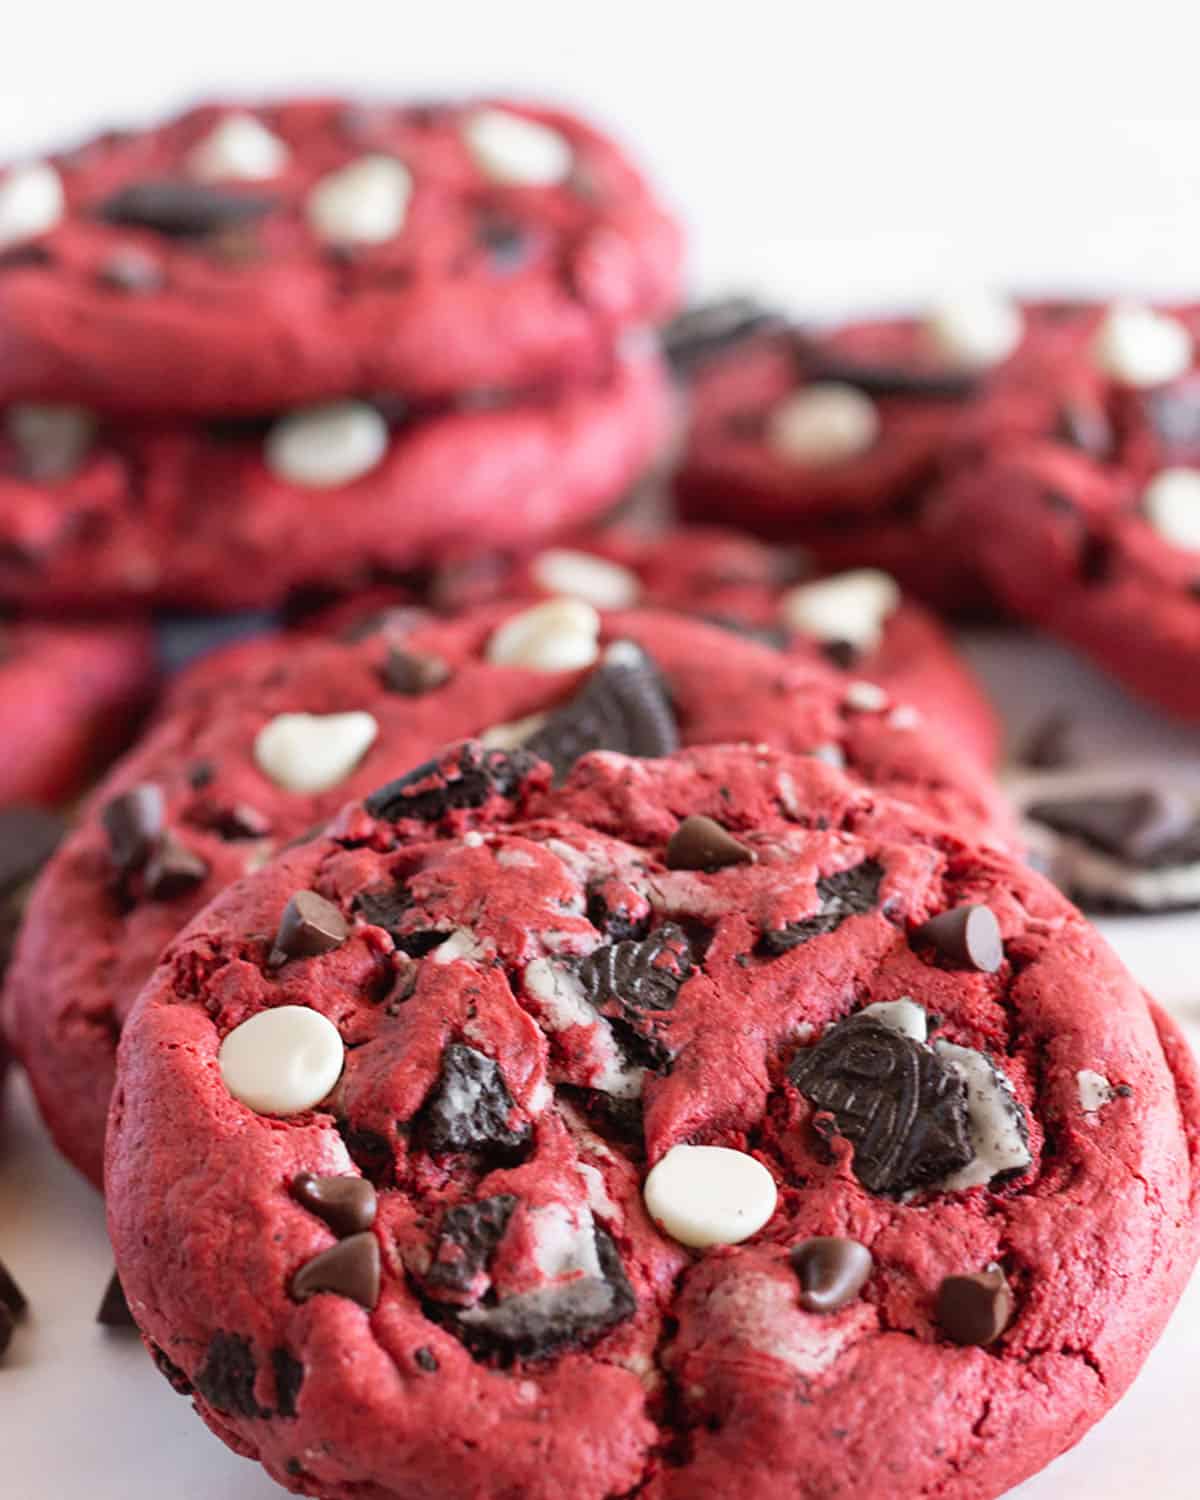 Red Velvet Oreo Cookies filled with Oreo cookie chunks and chocolate chips are leaned on each other.